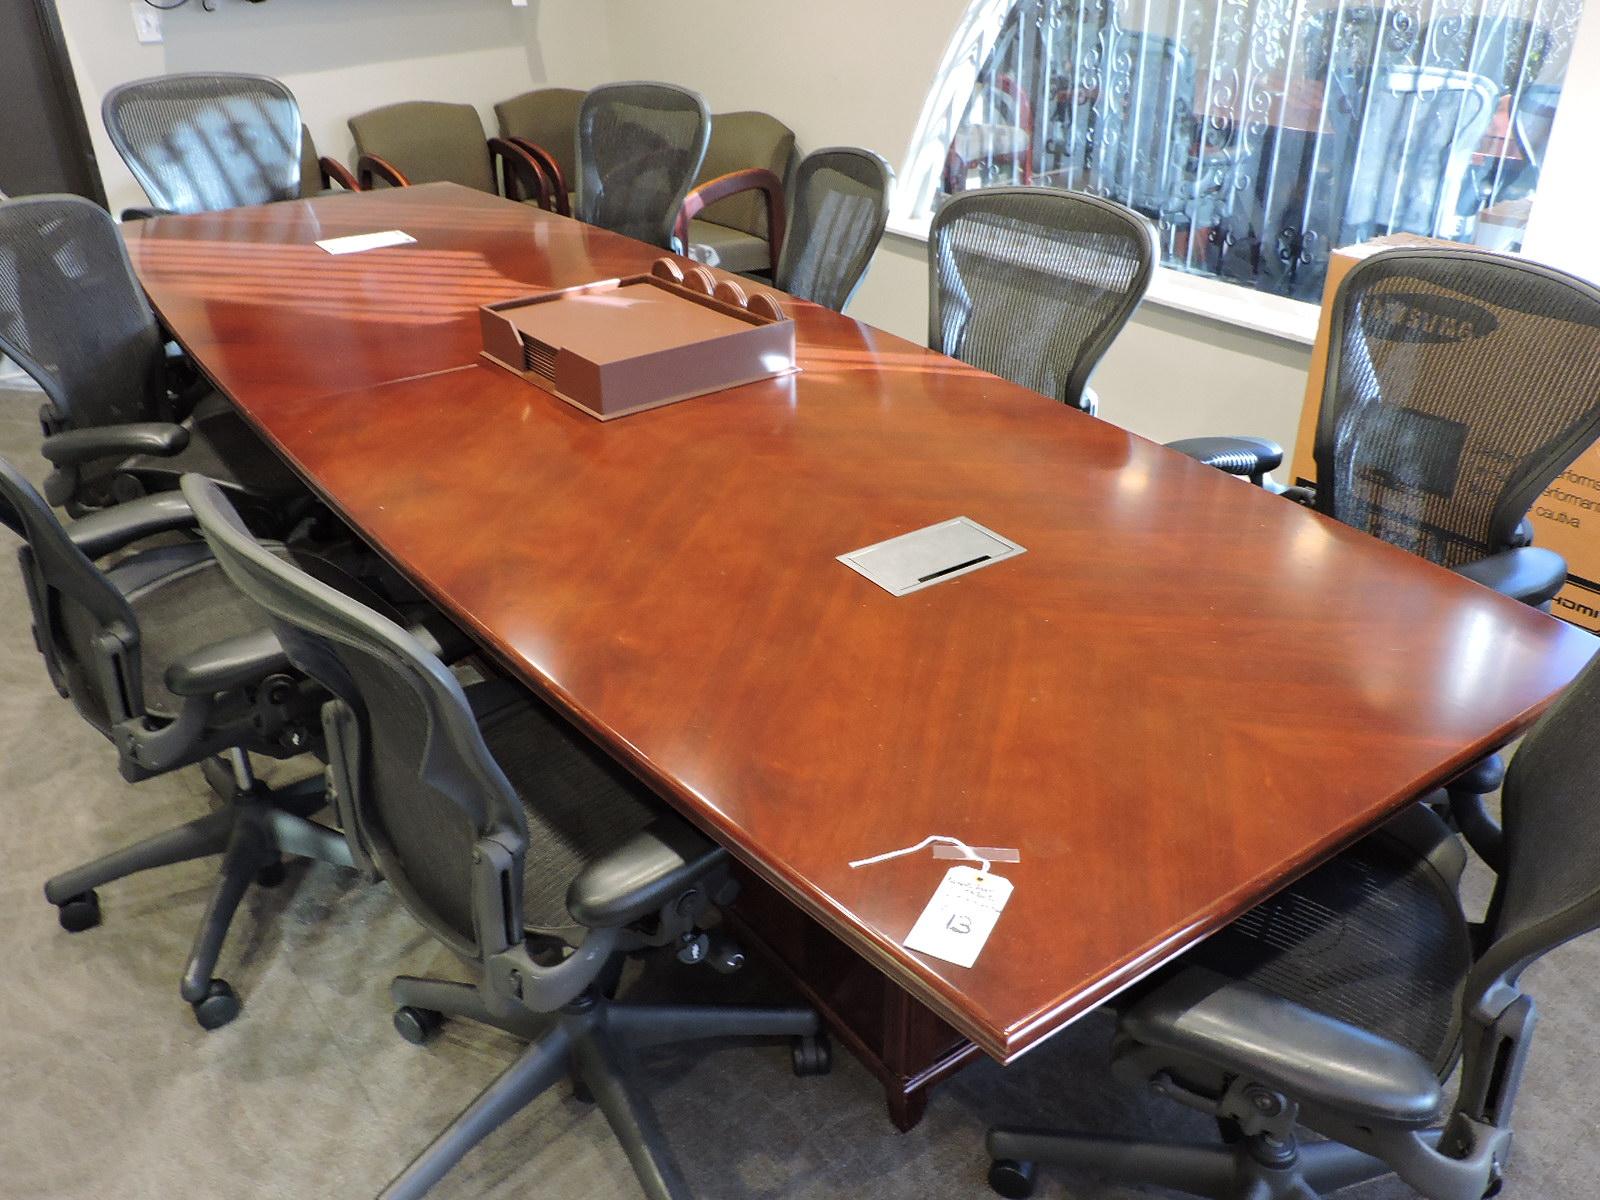 Board Room / Conference Room Table  12' X 4' X 30" Tall -- Good Condition